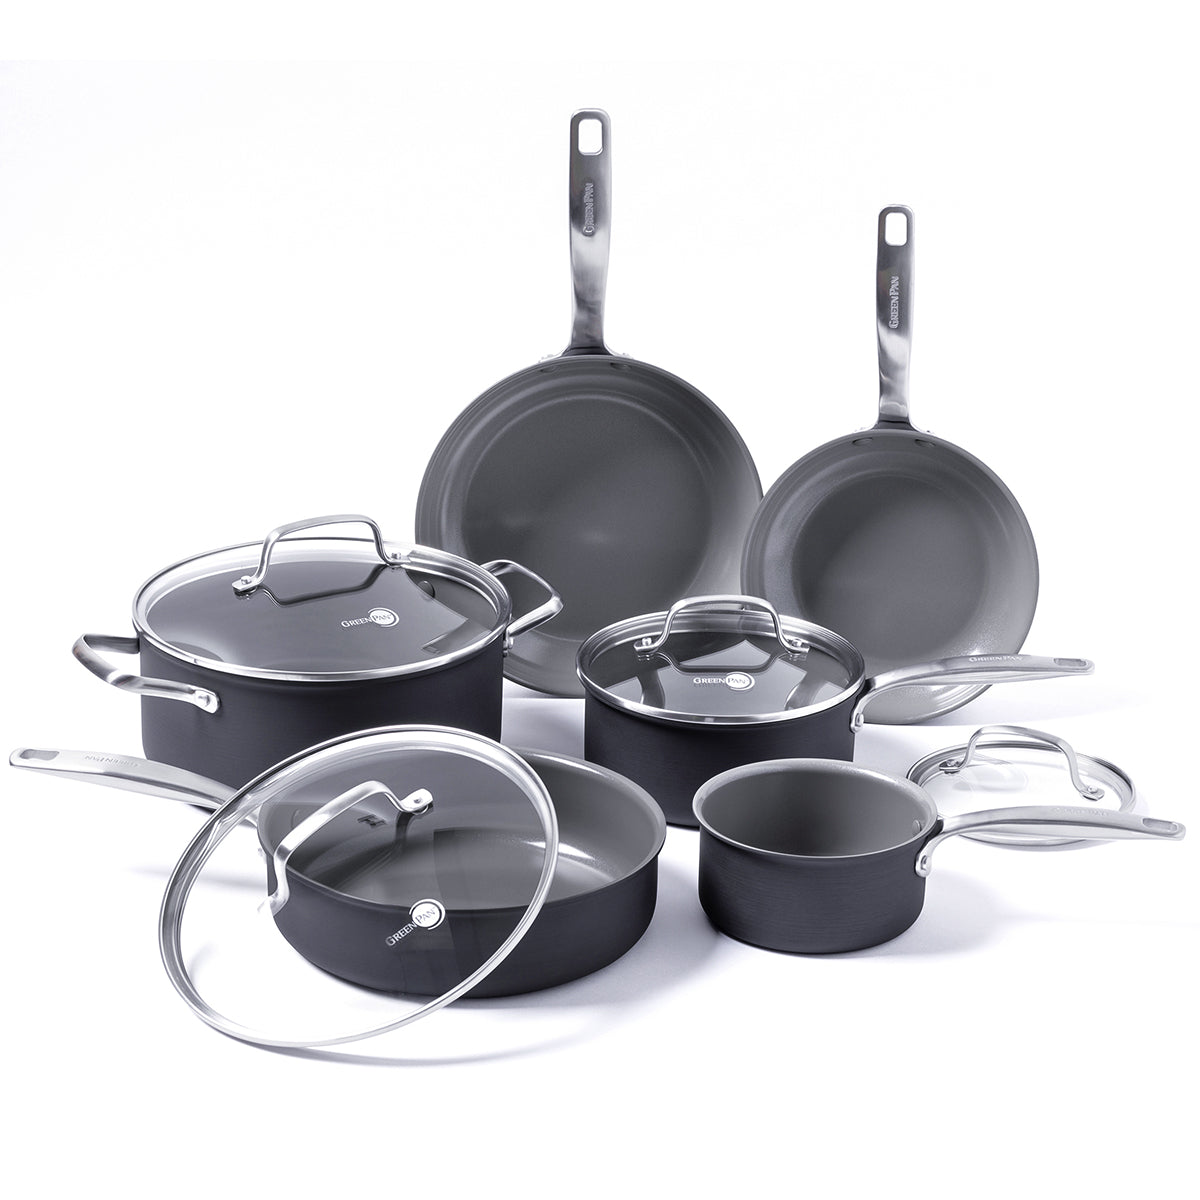 GreenPan Chatham Hard Anodized Healthy Ceramic Nonstick 10 Piece